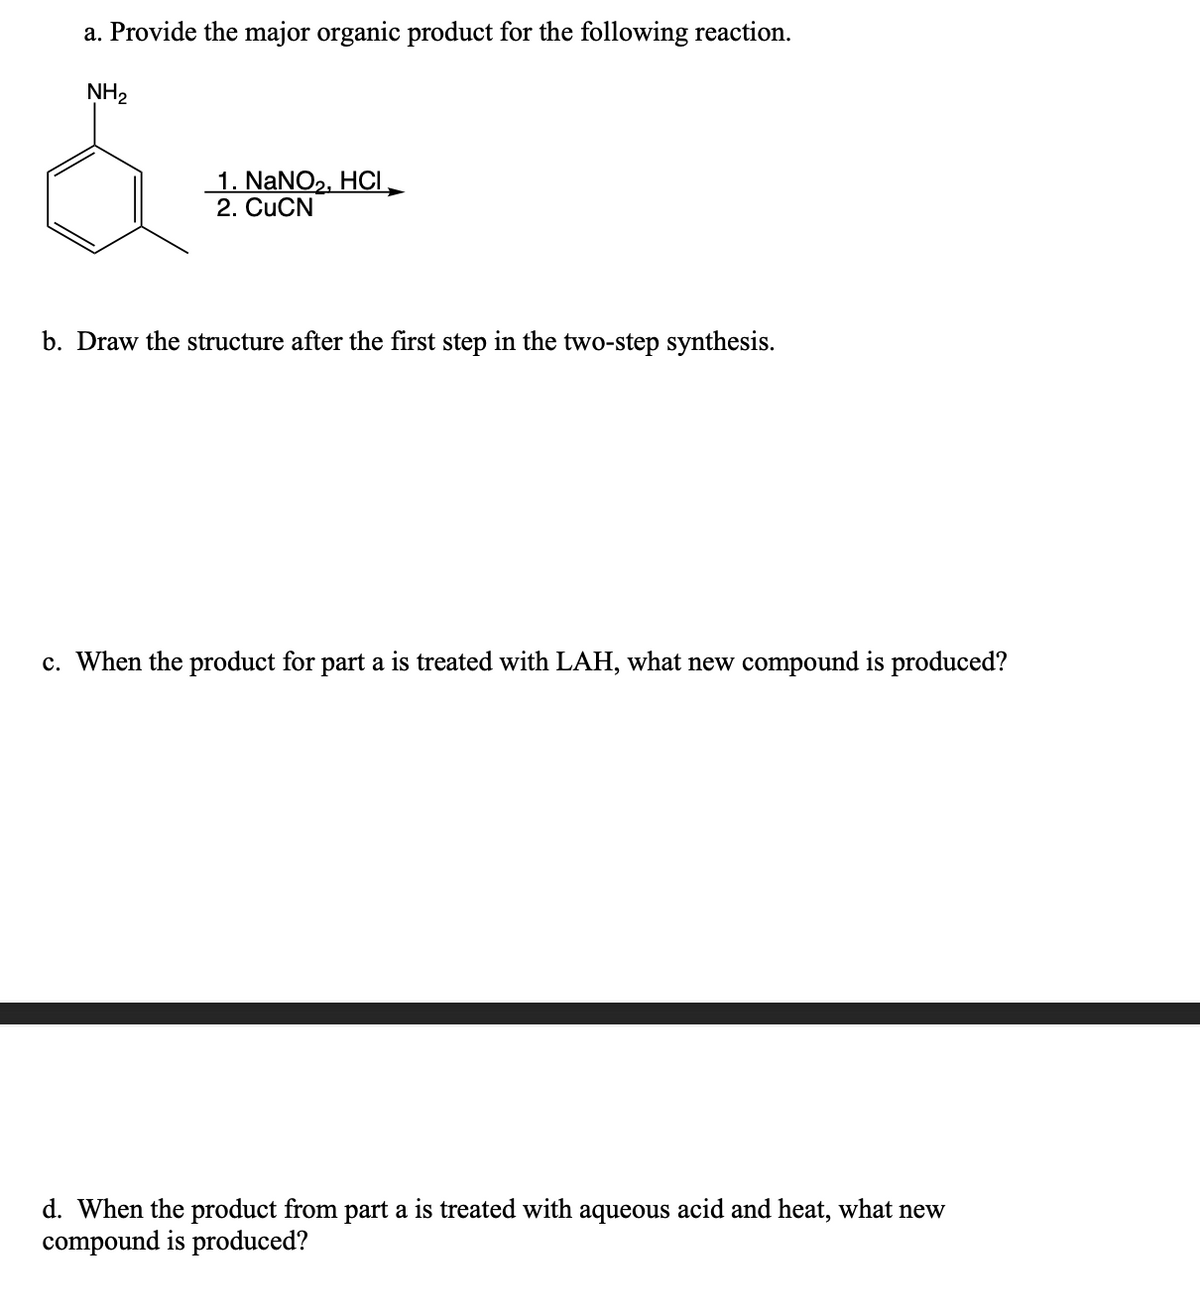 a. Provide the major organic product for the following reaction.
NH₂
1. NaNO₂, HCI
2. CuCN
b. Draw the structure after the first step in the two-step synthesis.
c. When the product for part a is treated with LAH, what new compound is produced?
d. When the product from part a is treated with aqueous acid and heat, what new
compound is produced?